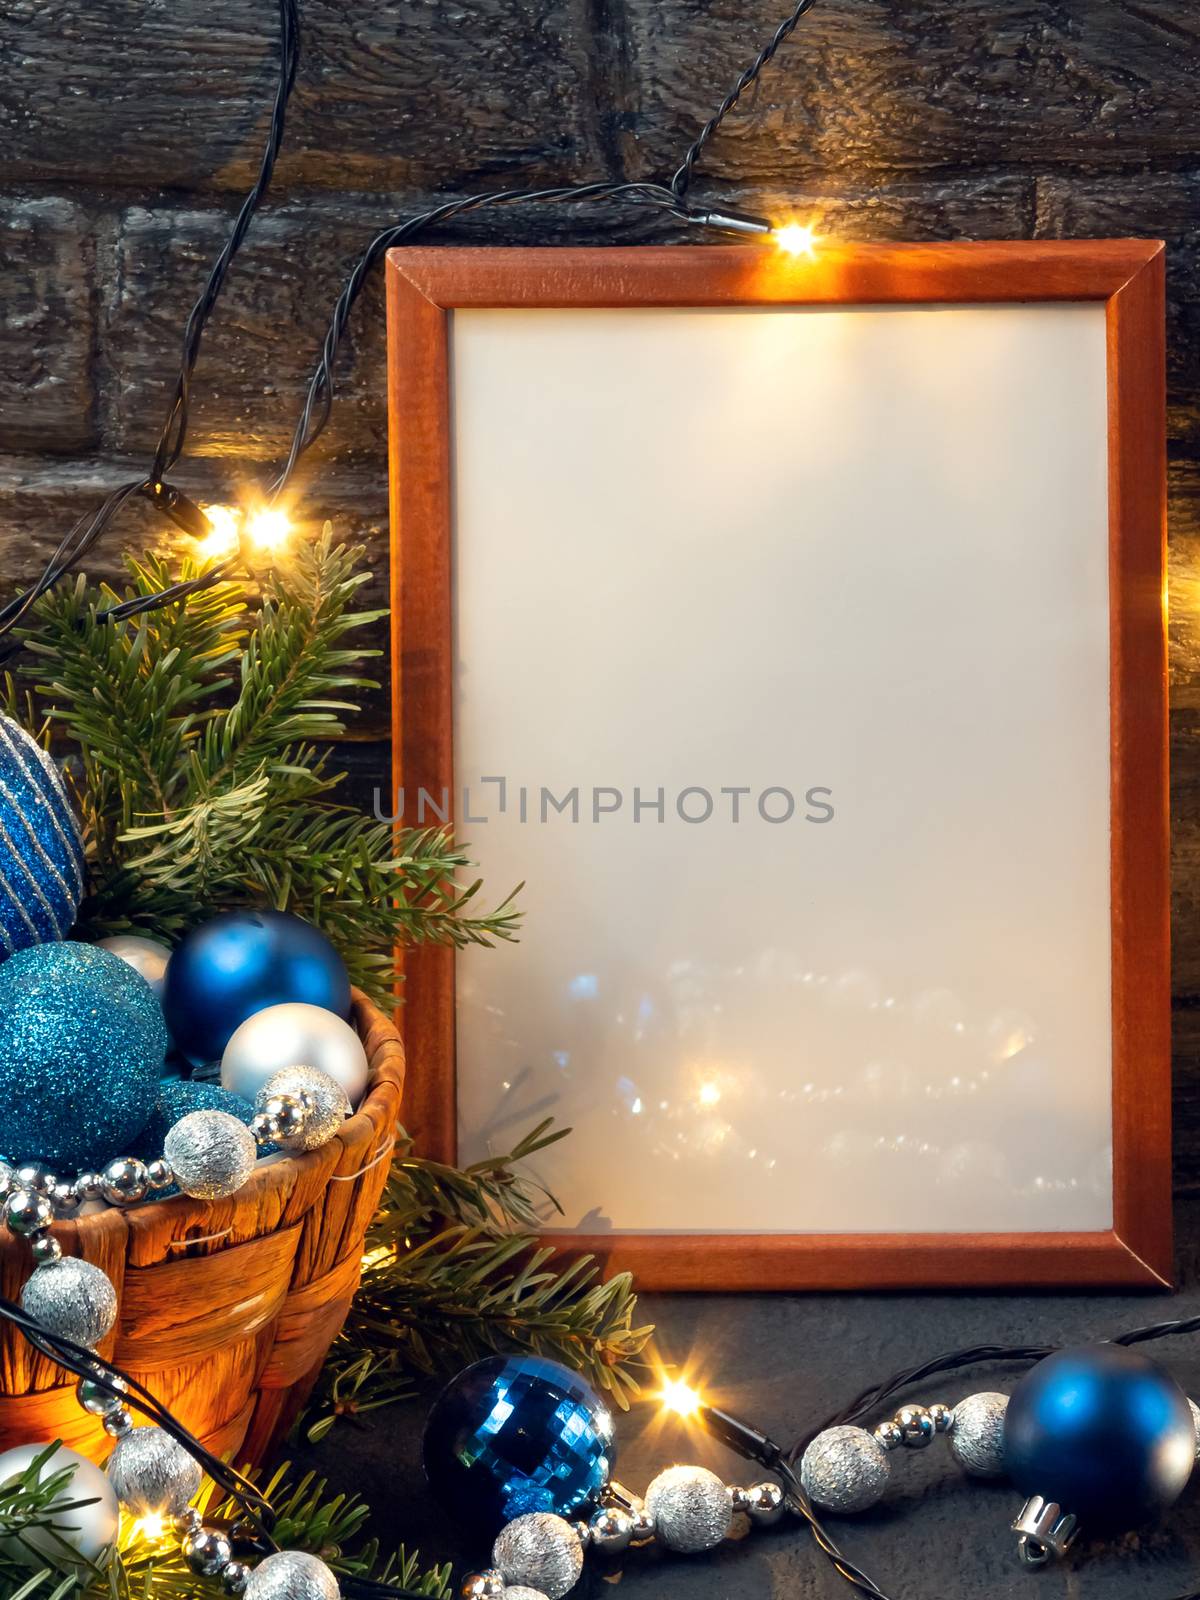 Christmas composition with a wooden frame, lights and decorations in a basket, copy space, place for text by galsand